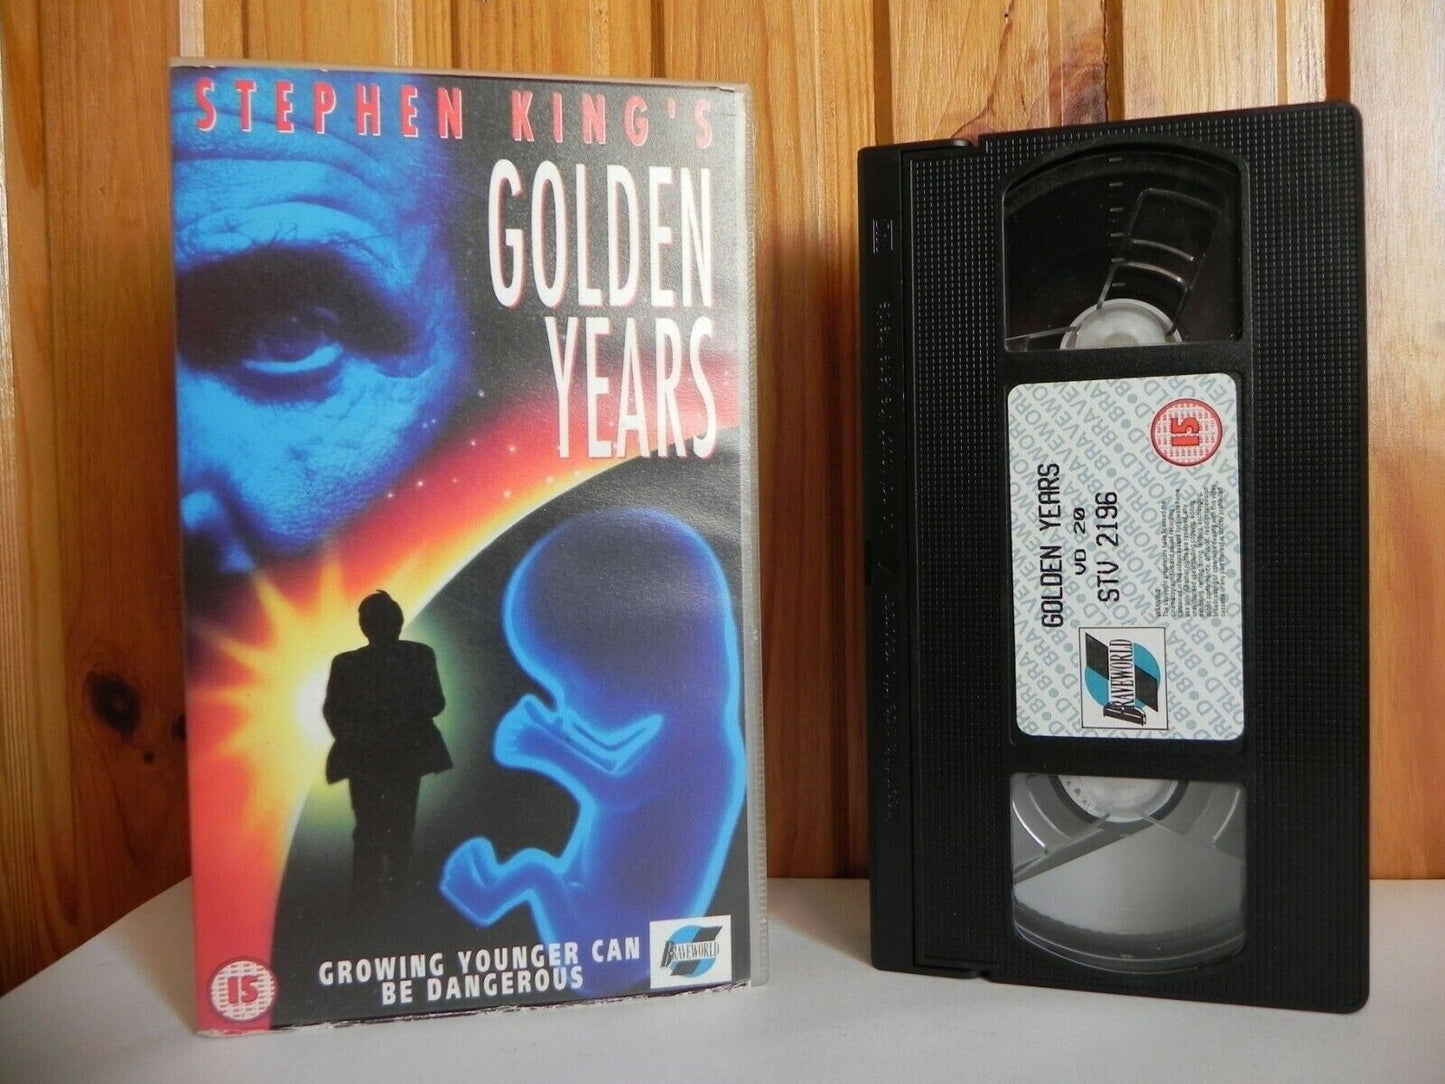 Golden Years: (1991 T.V.) Documentary Created By Stephen King - Mystery - VHS-